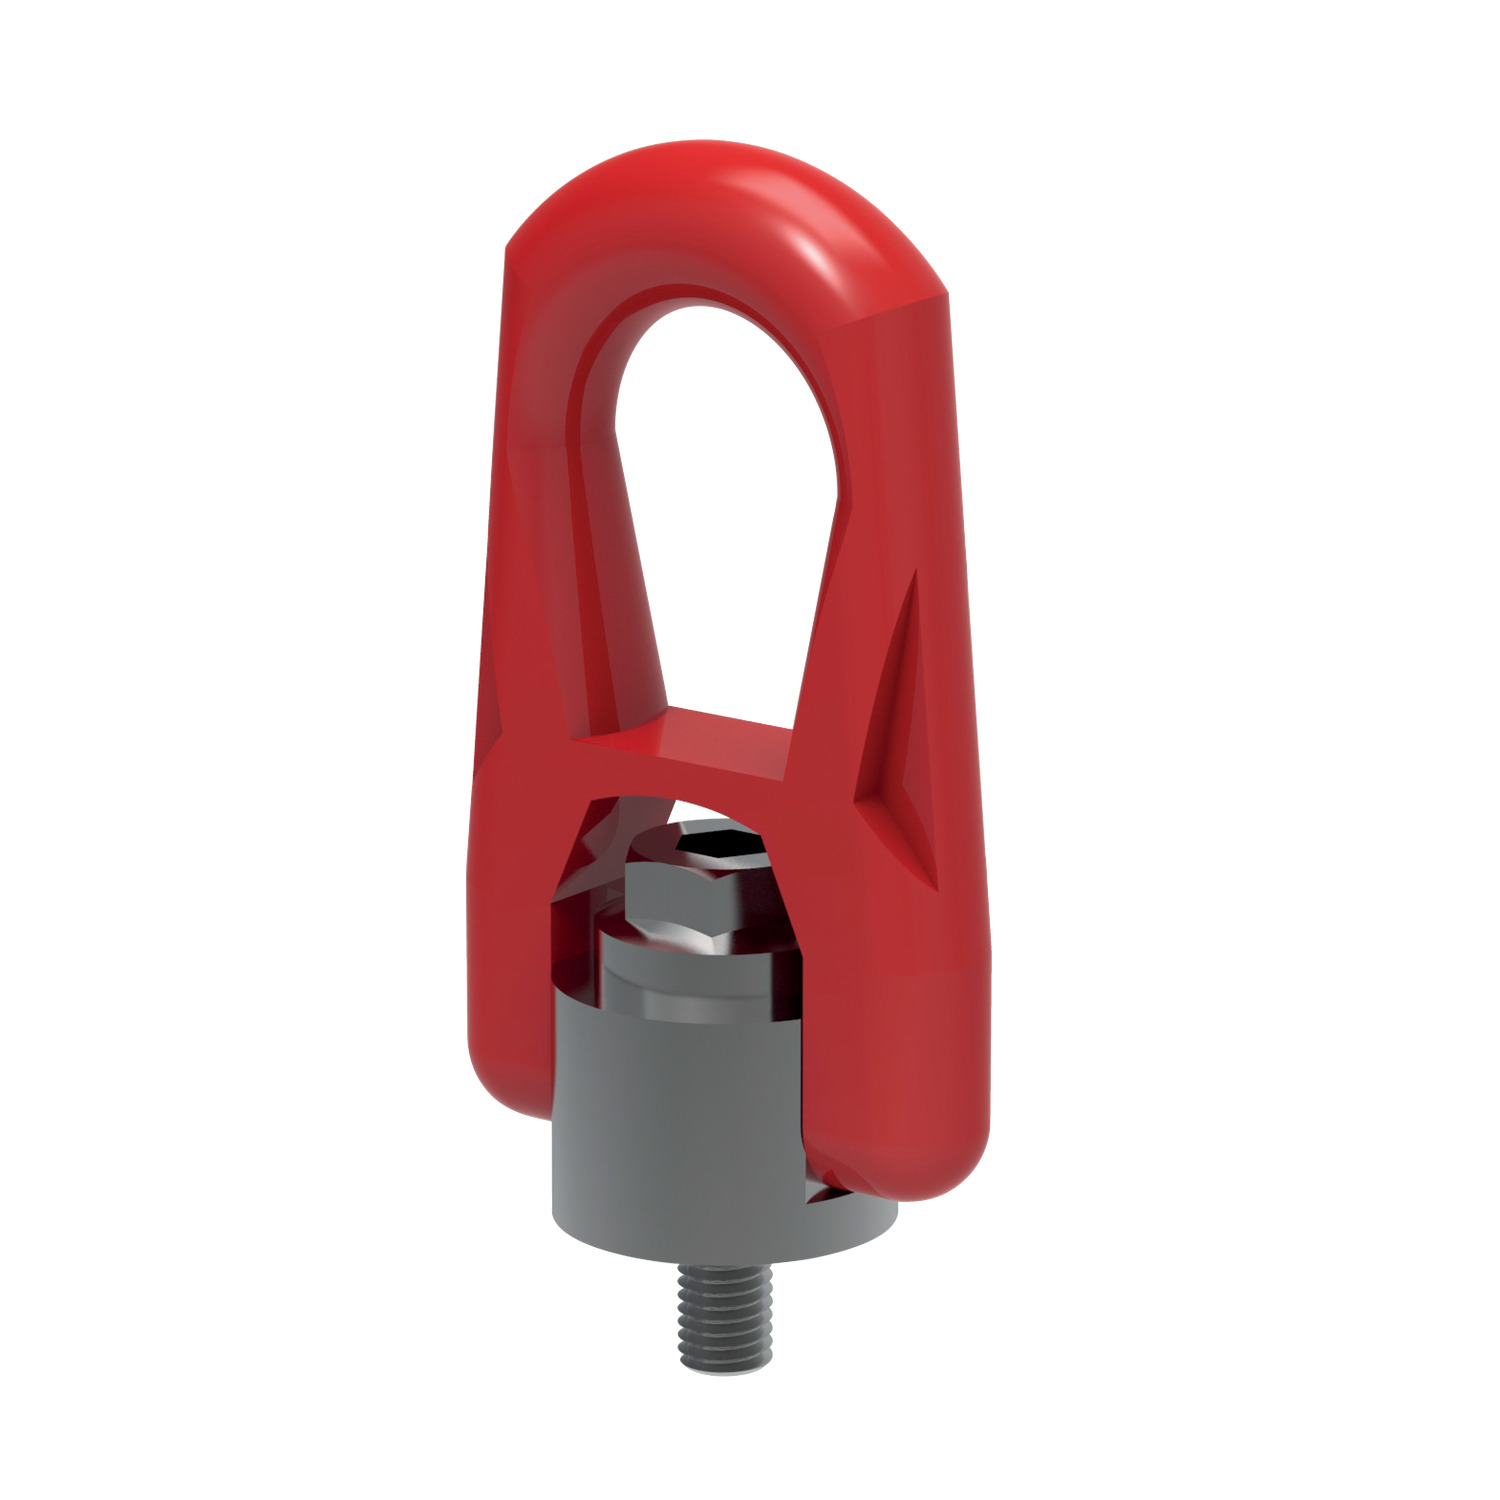 Double Swivel Rings Male Double articulated swivel lifting rings with male thread. Available in M4 to M30 as well as up to UNC 1"-8 threads. Very low overhang and large support surface.